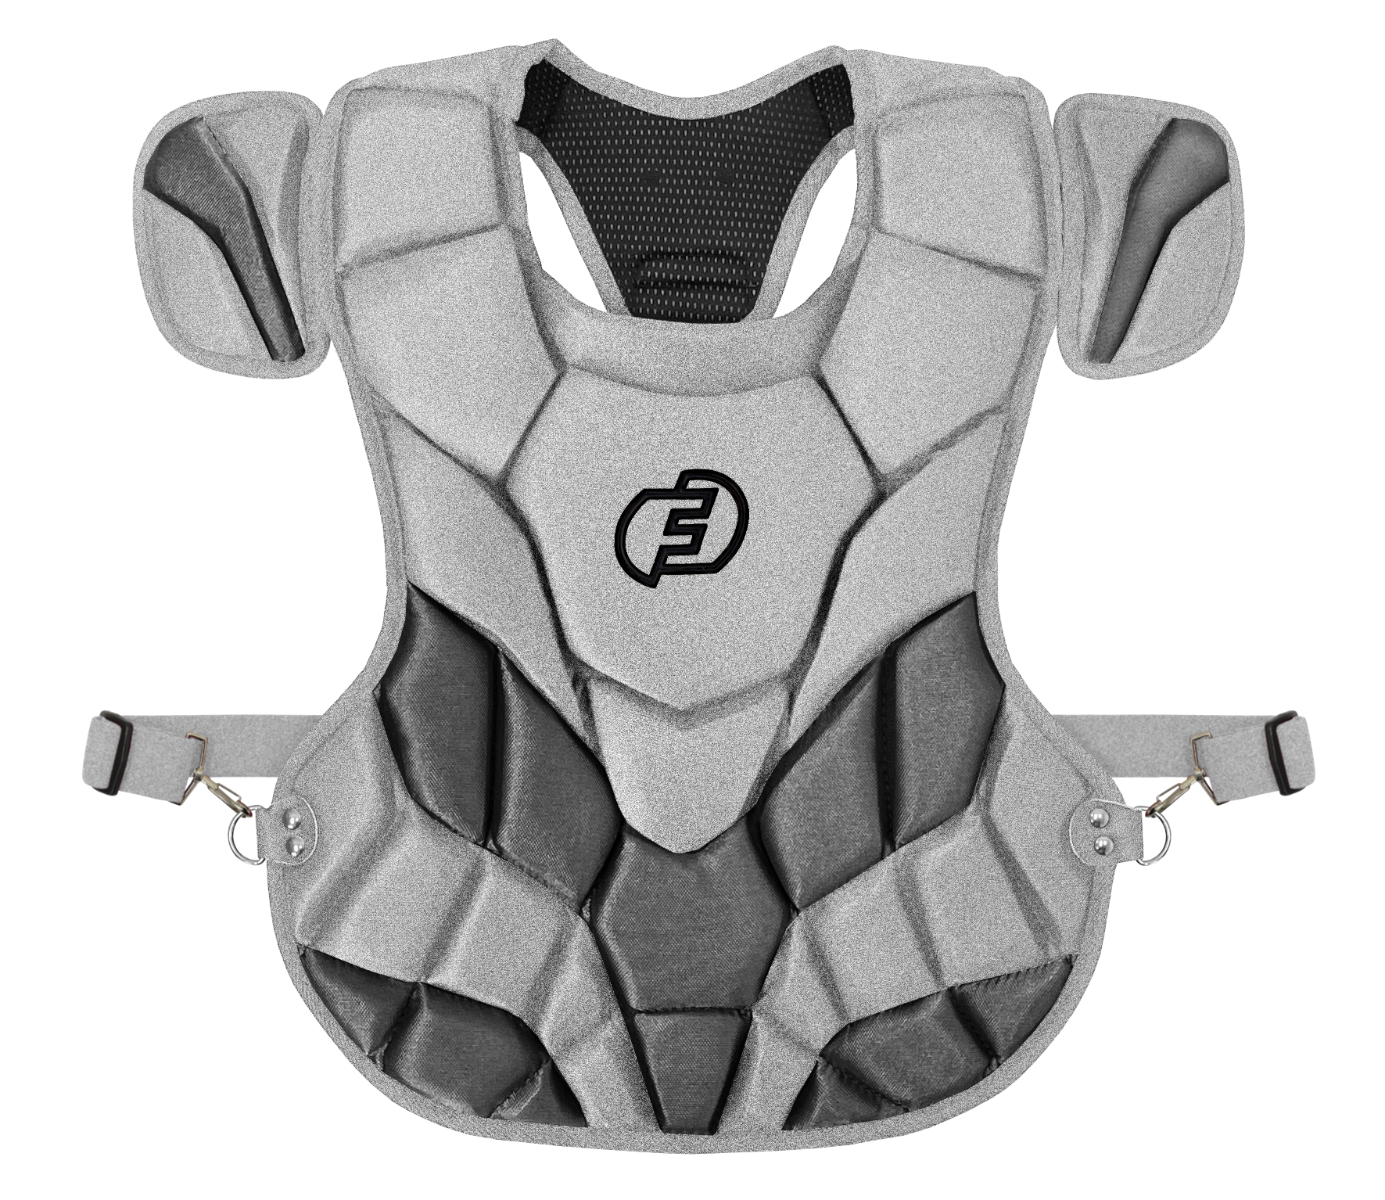 SEI/NOCSAE Certified Chest Protector with DuPont™ Kevlar®